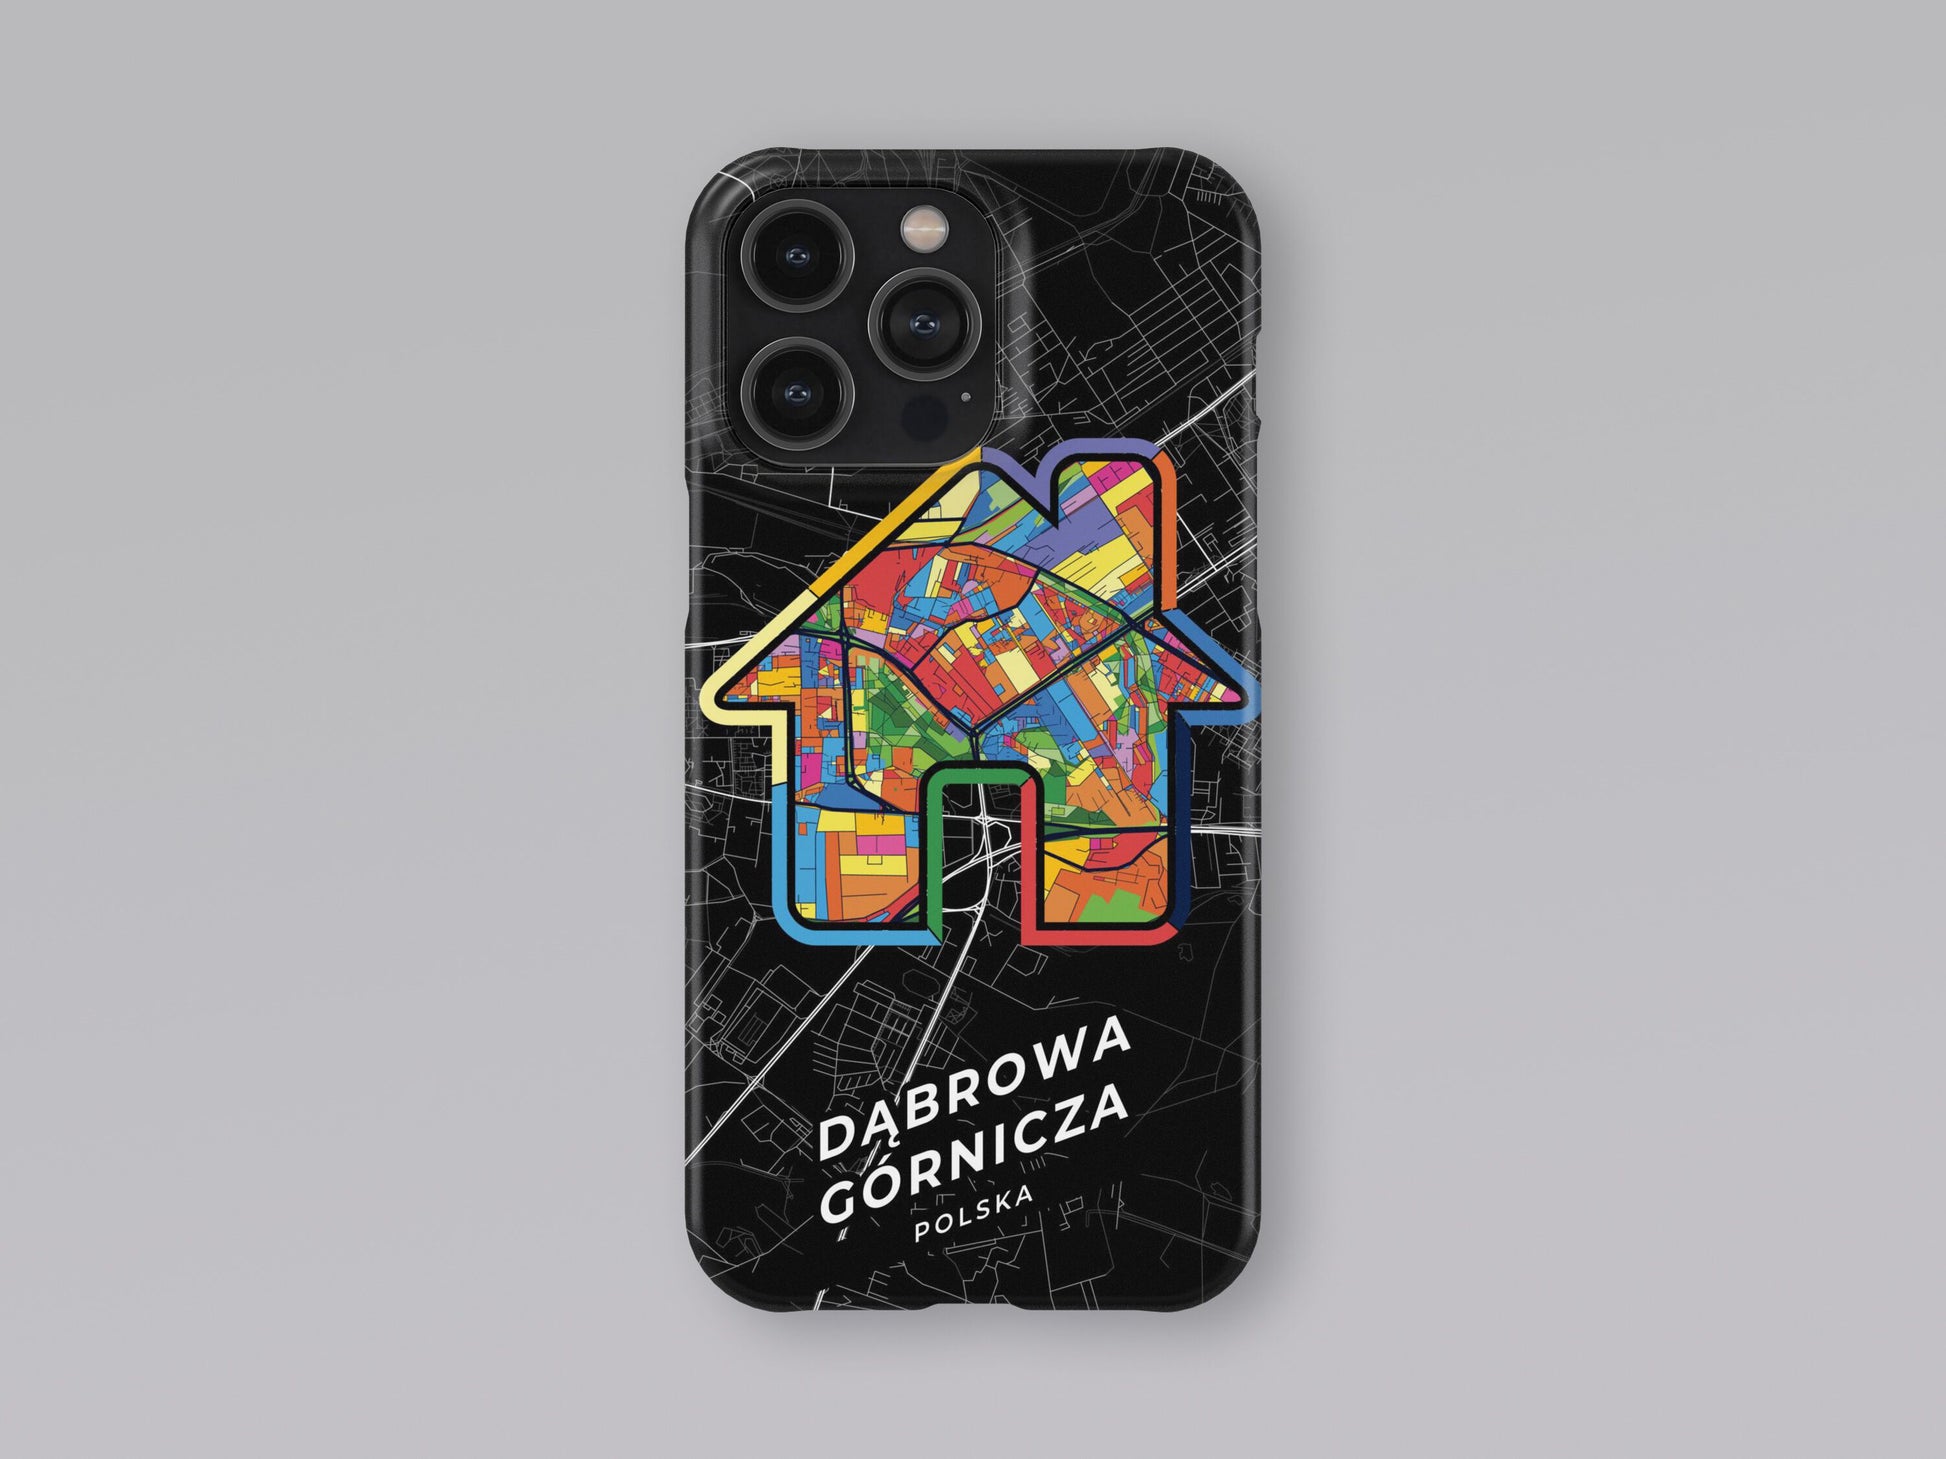 Dąbrowa Górnicza Poland slim phone case with colorful icon. Birthday, wedding or housewarming gift. Couple match cases. 3